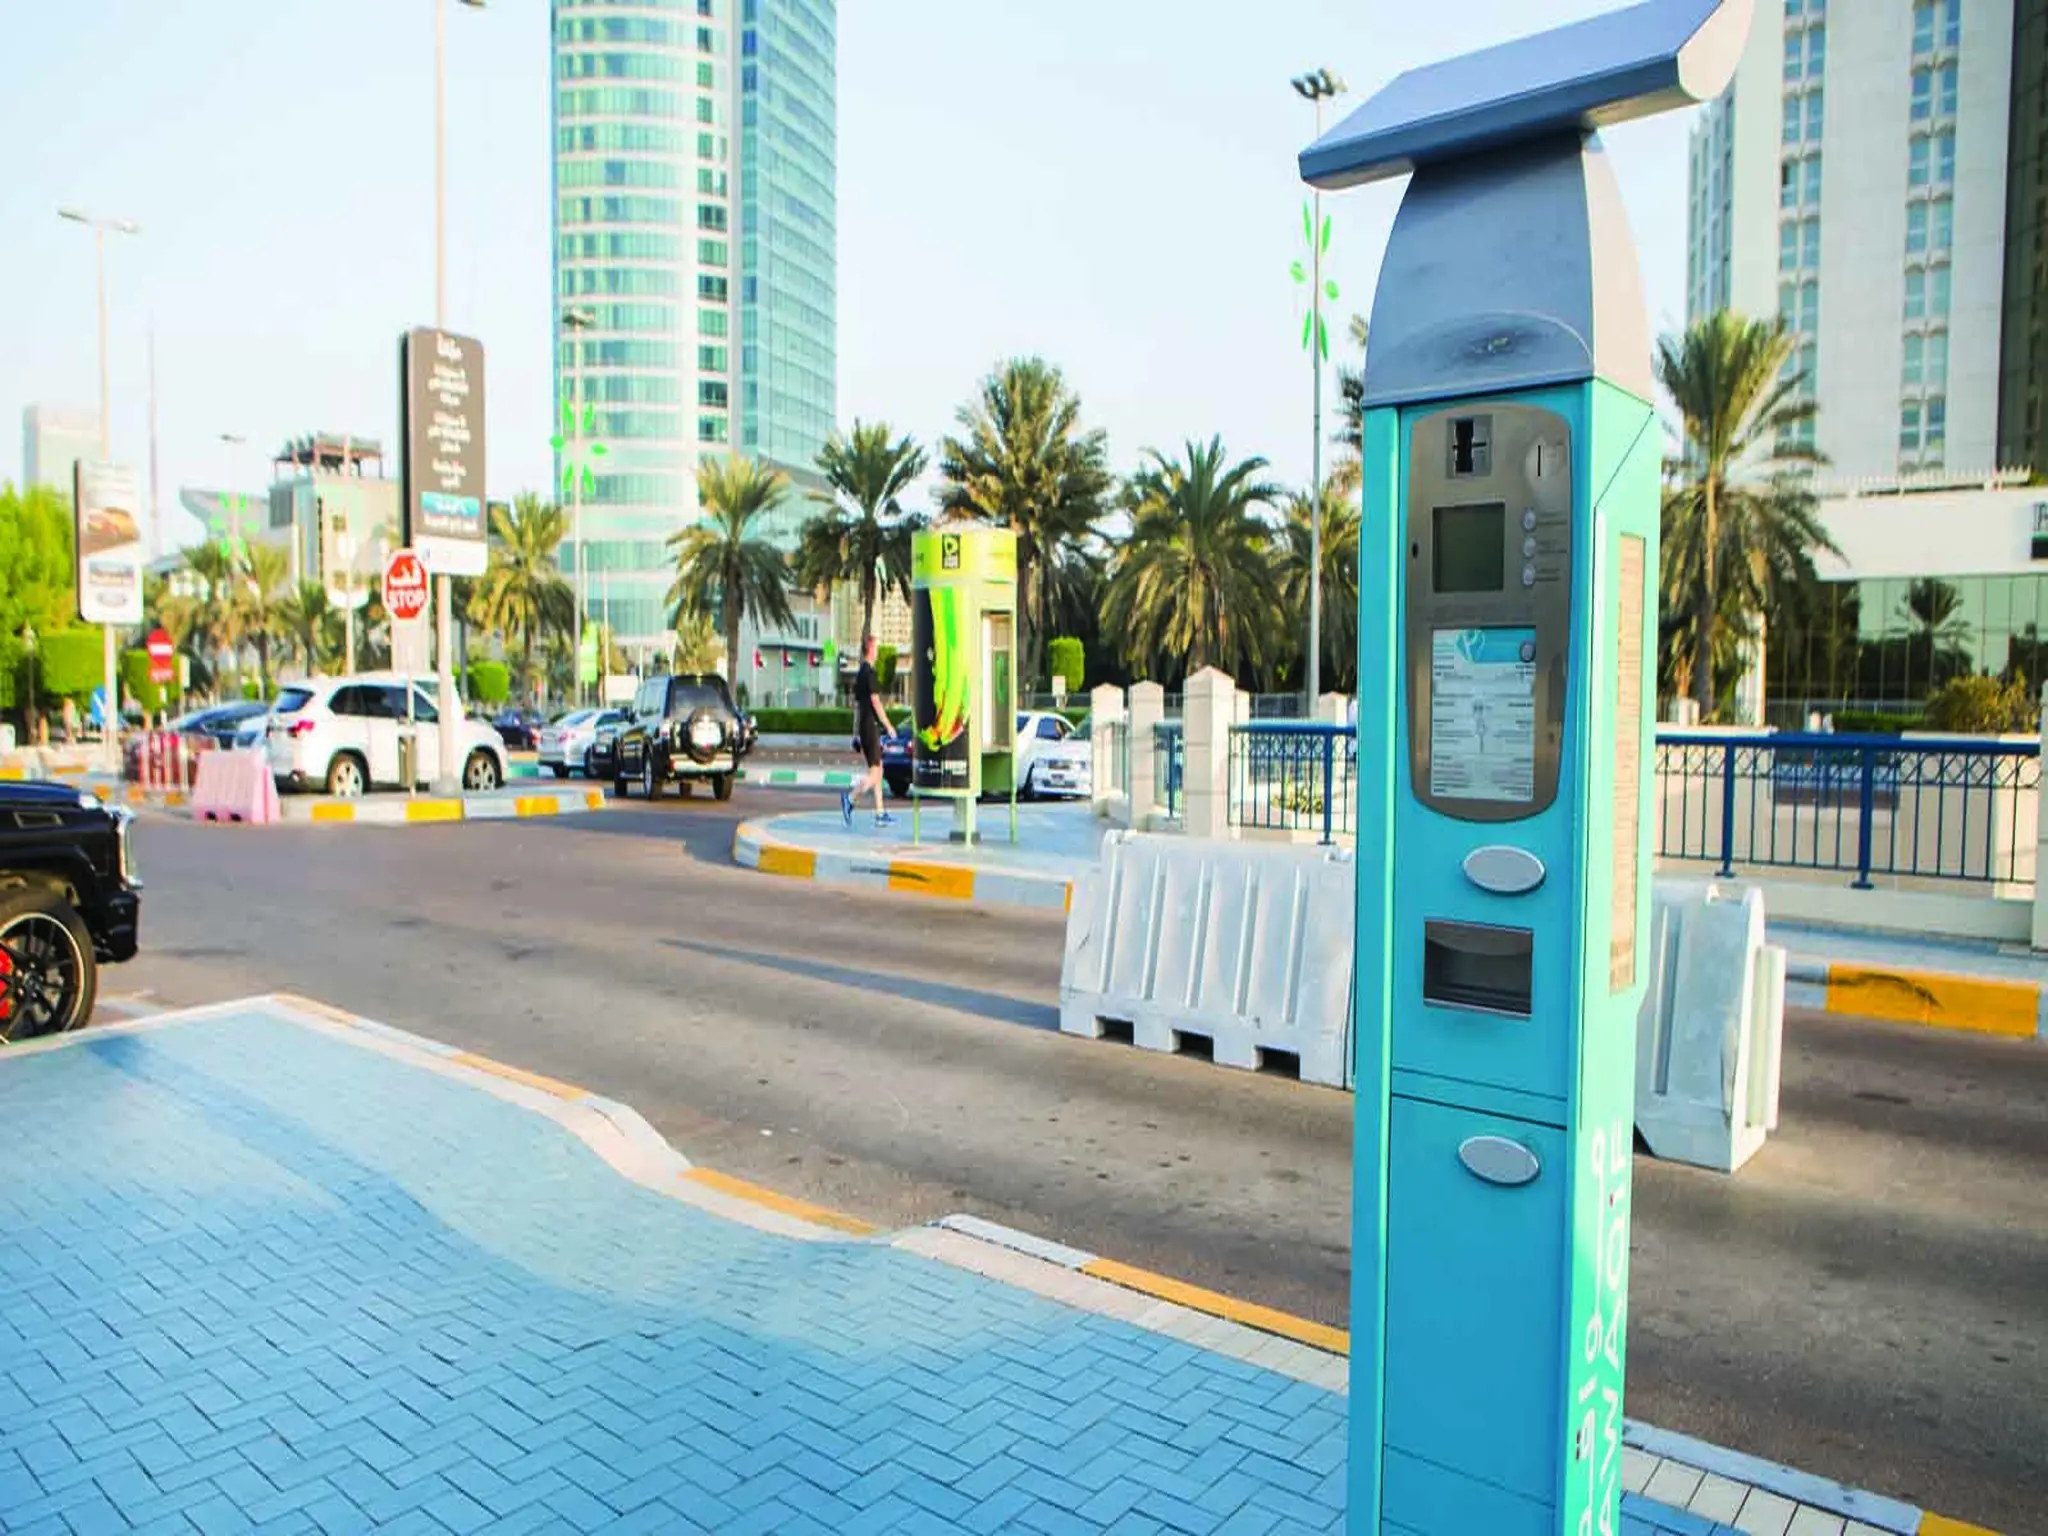 The UAE launches subscription for public parking for 166 dirhams per month for these areas